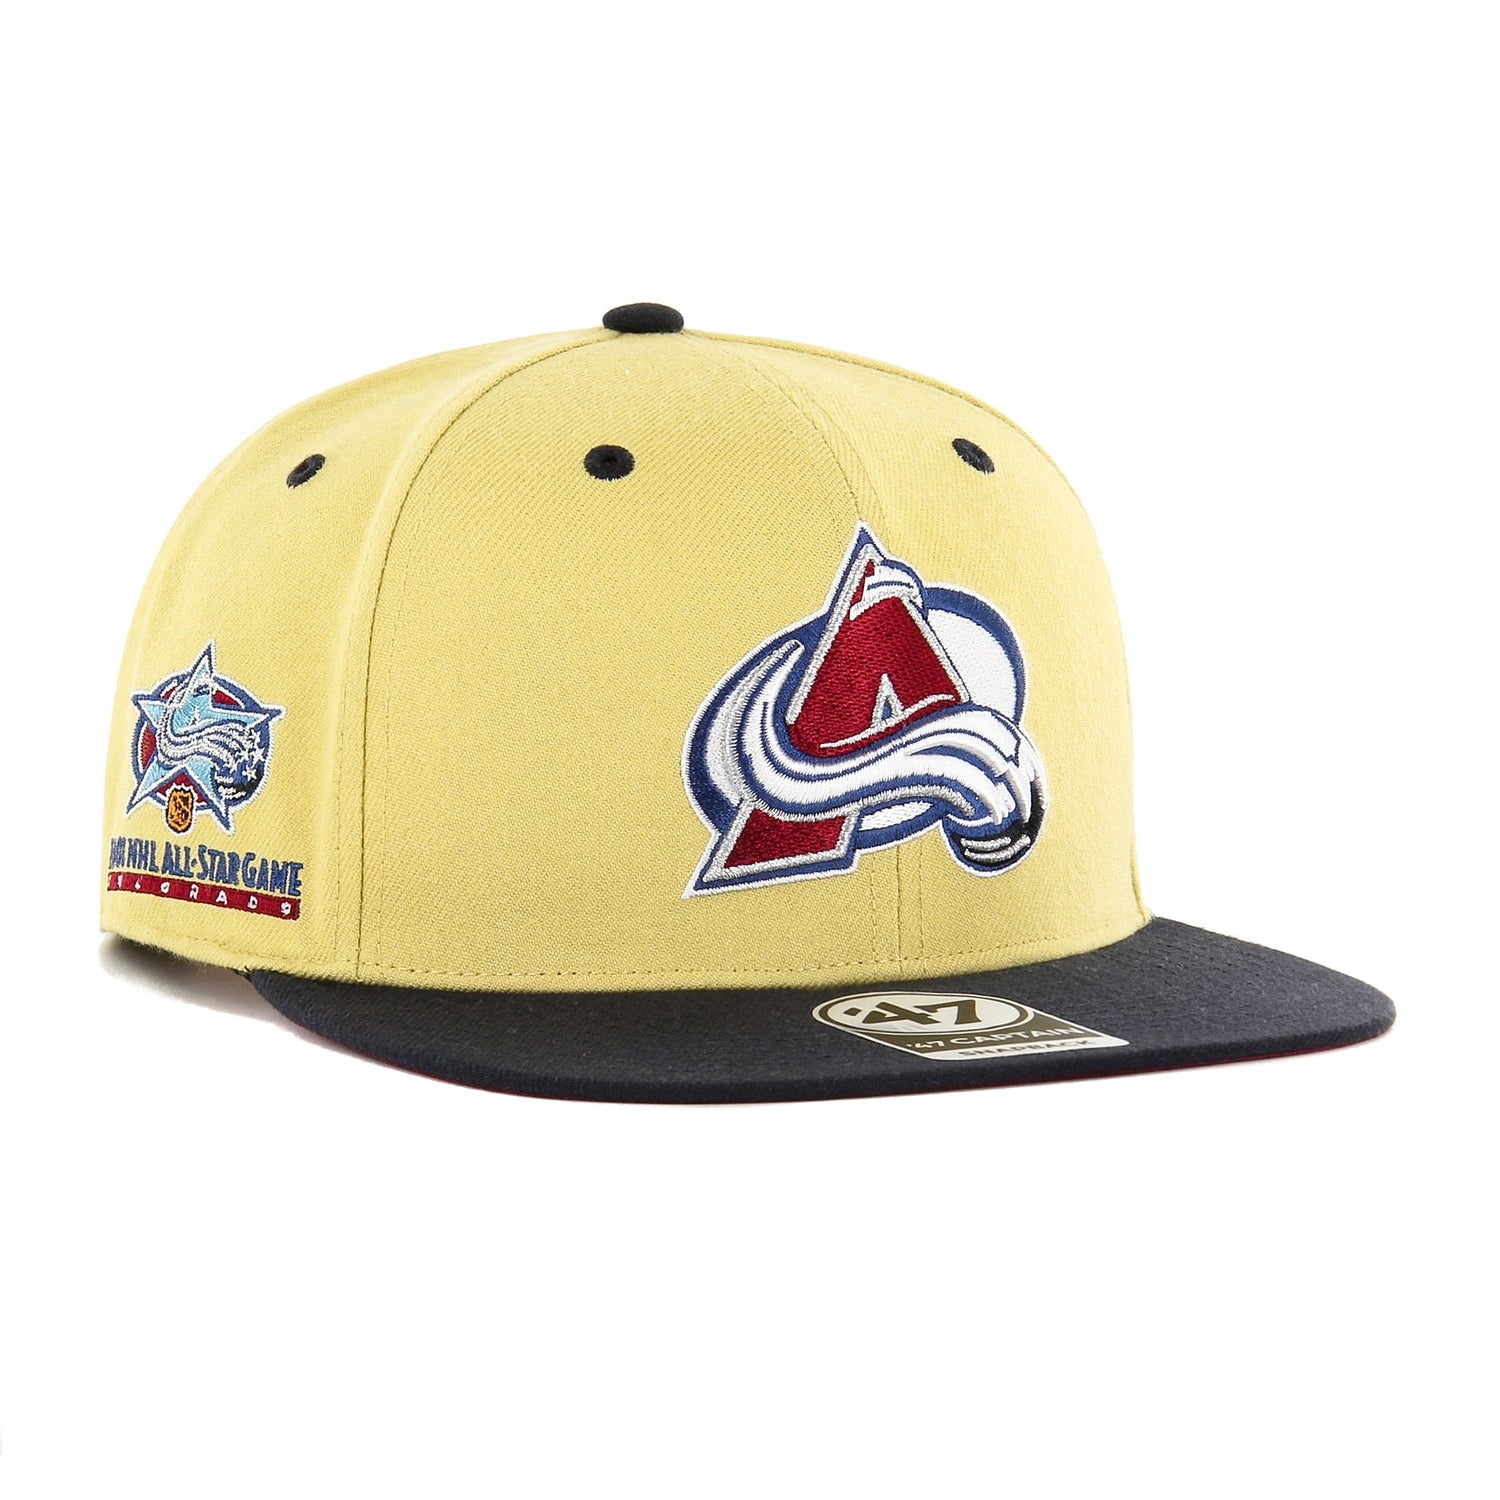 New Maroon Colorado Avalanche Team Issued SnapBack Hat